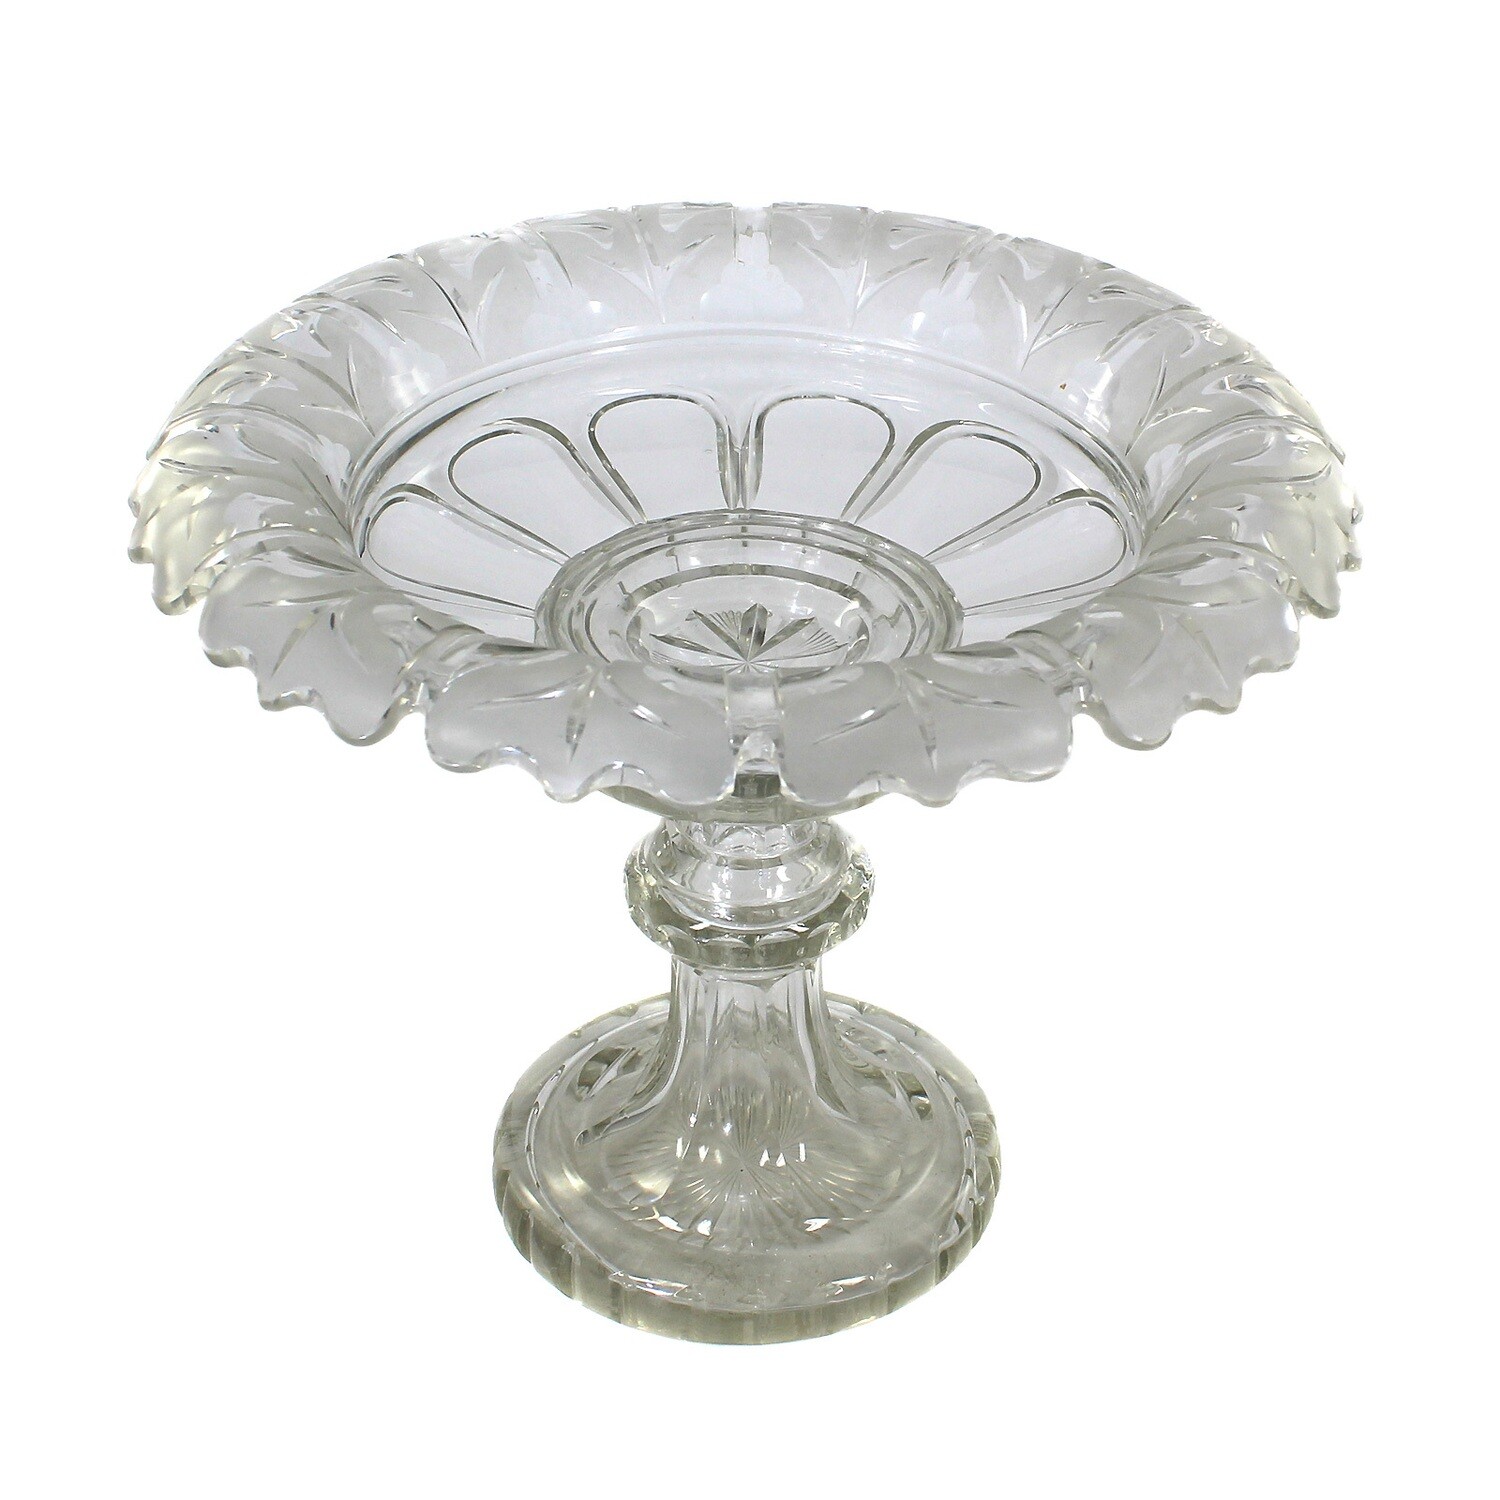 Large two-piece centerpiece made of colorless tongue-cut glass, Bohemia